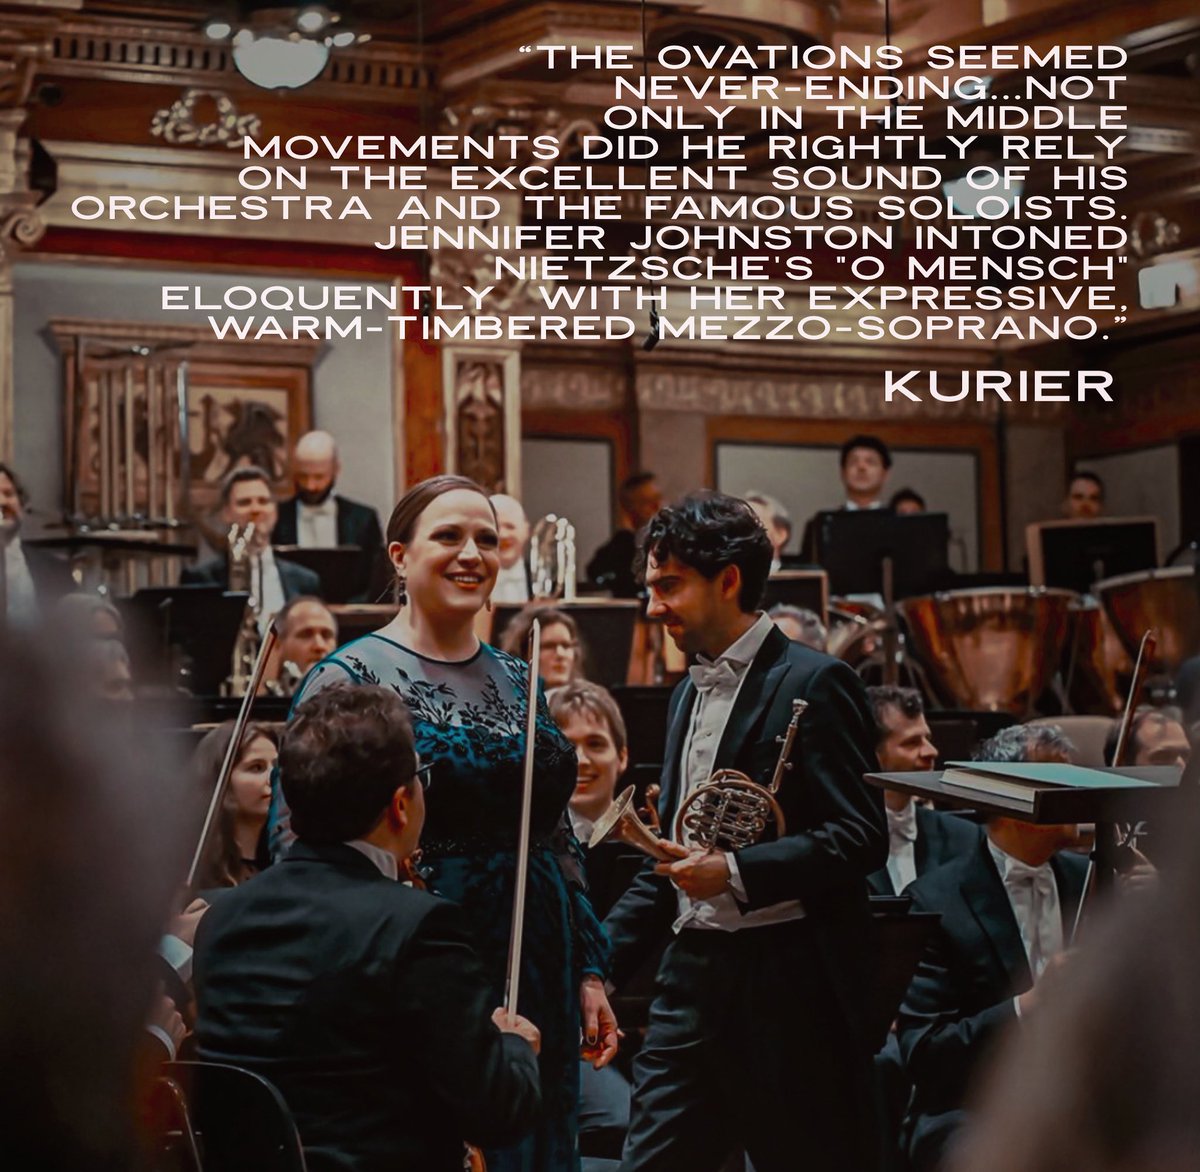 Thanks @KURIERat! The audience reception to Mahler 3 with @klausmakela and @ConcertgbOrkest last night @Musikverein was overwhelming, it really was a special evening.